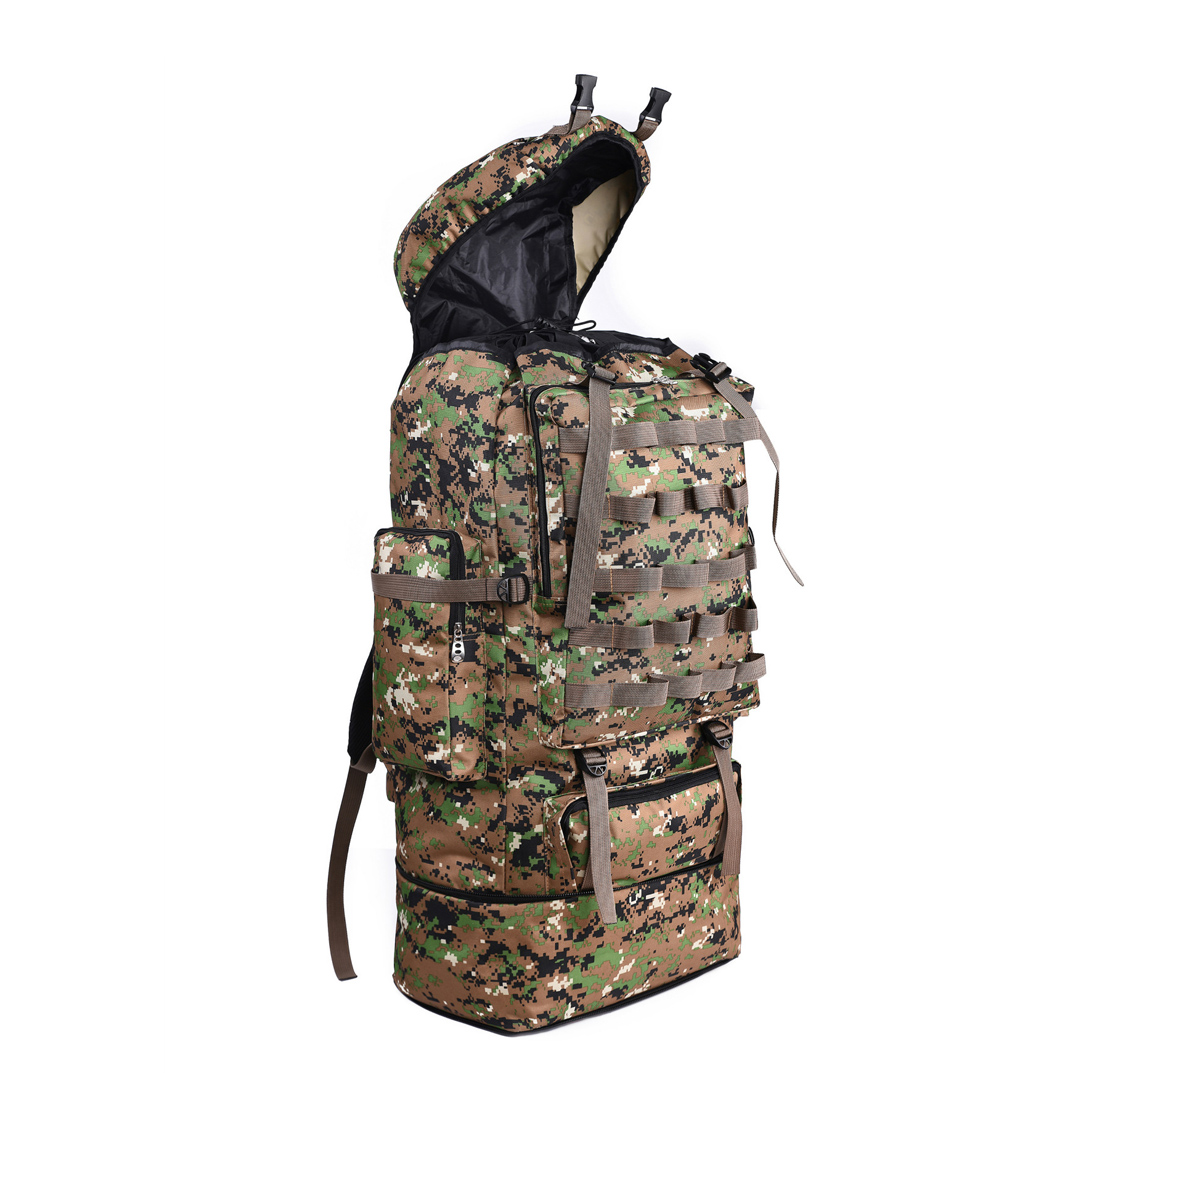 90-100L-Military-Tactical-Backpack-Waterproof-Molle-Climbing-Bag-Outdoor-Trekking-Camping-1865666-5